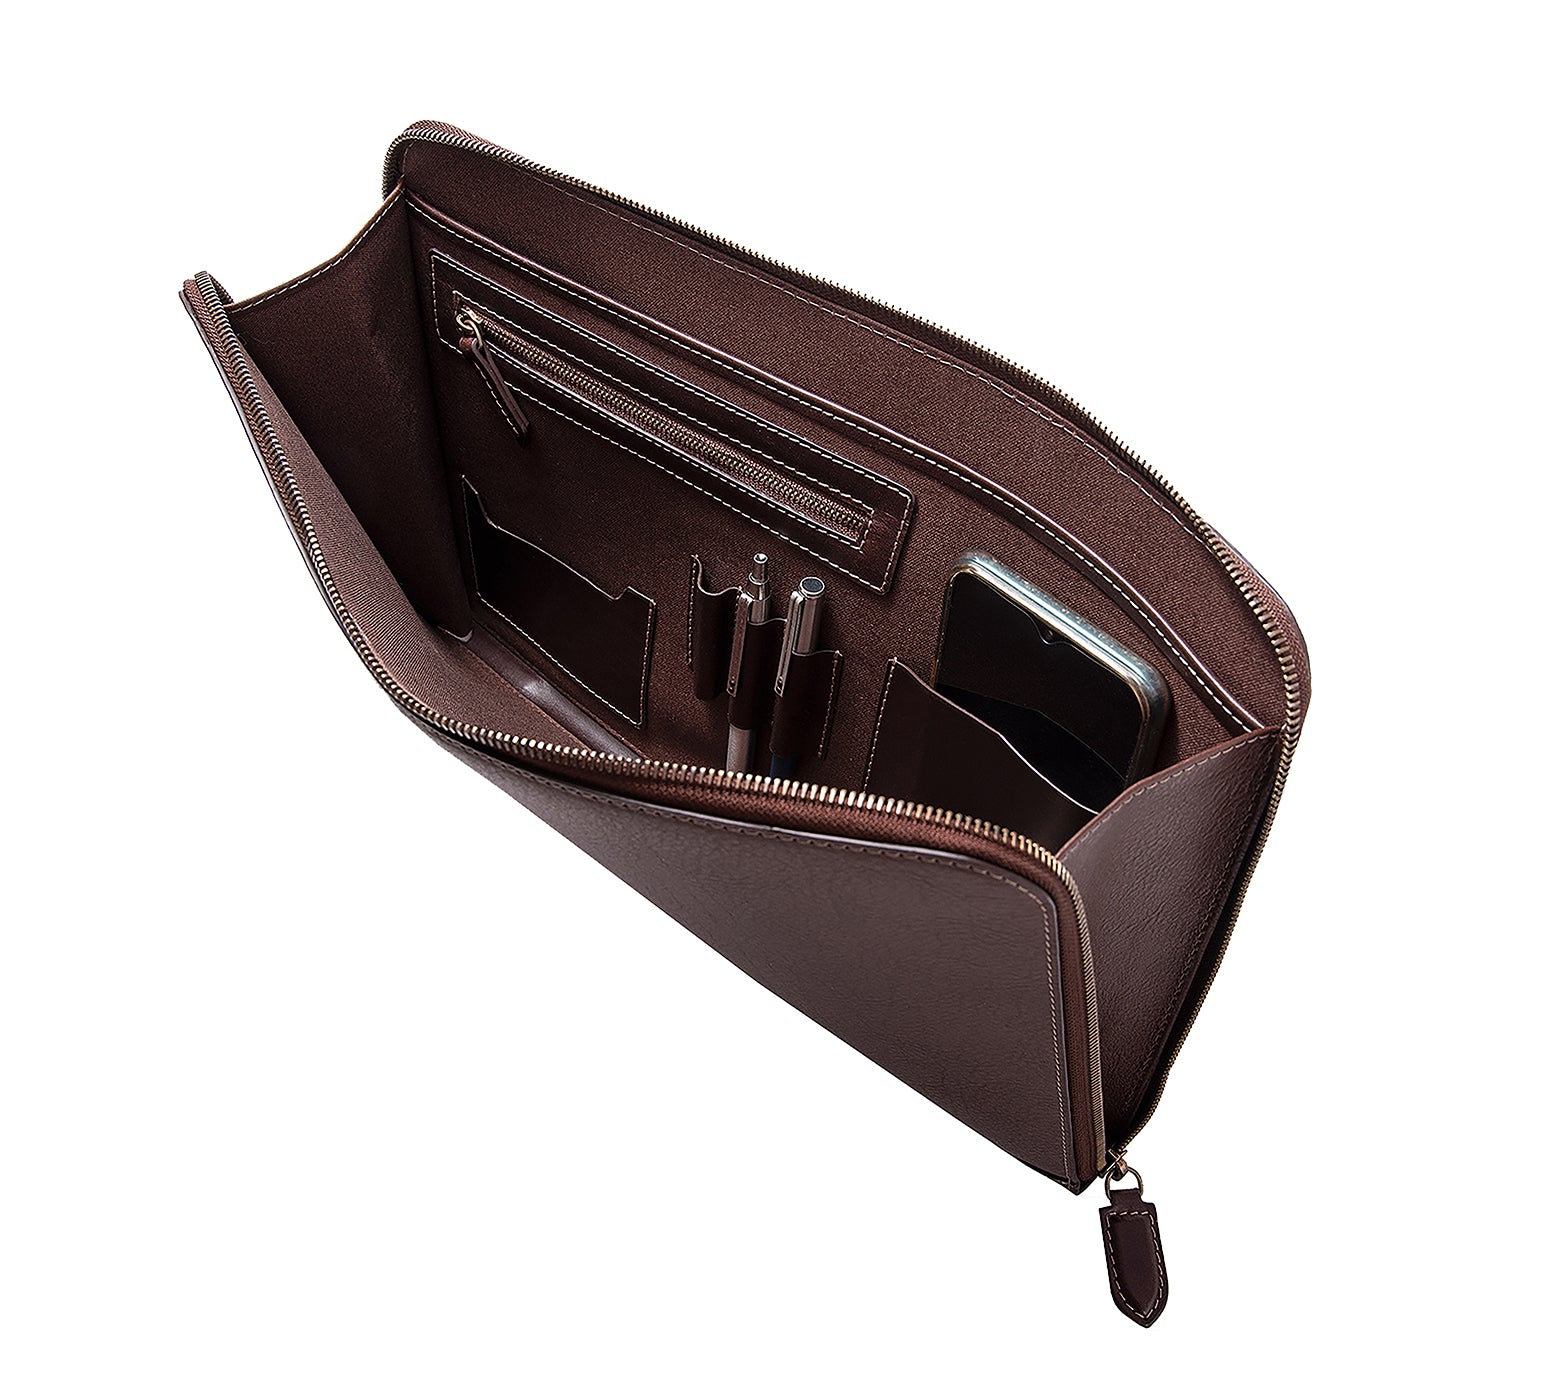 Albany Leather Document Holder from Rydal in 'Dark Brown' showing interior.